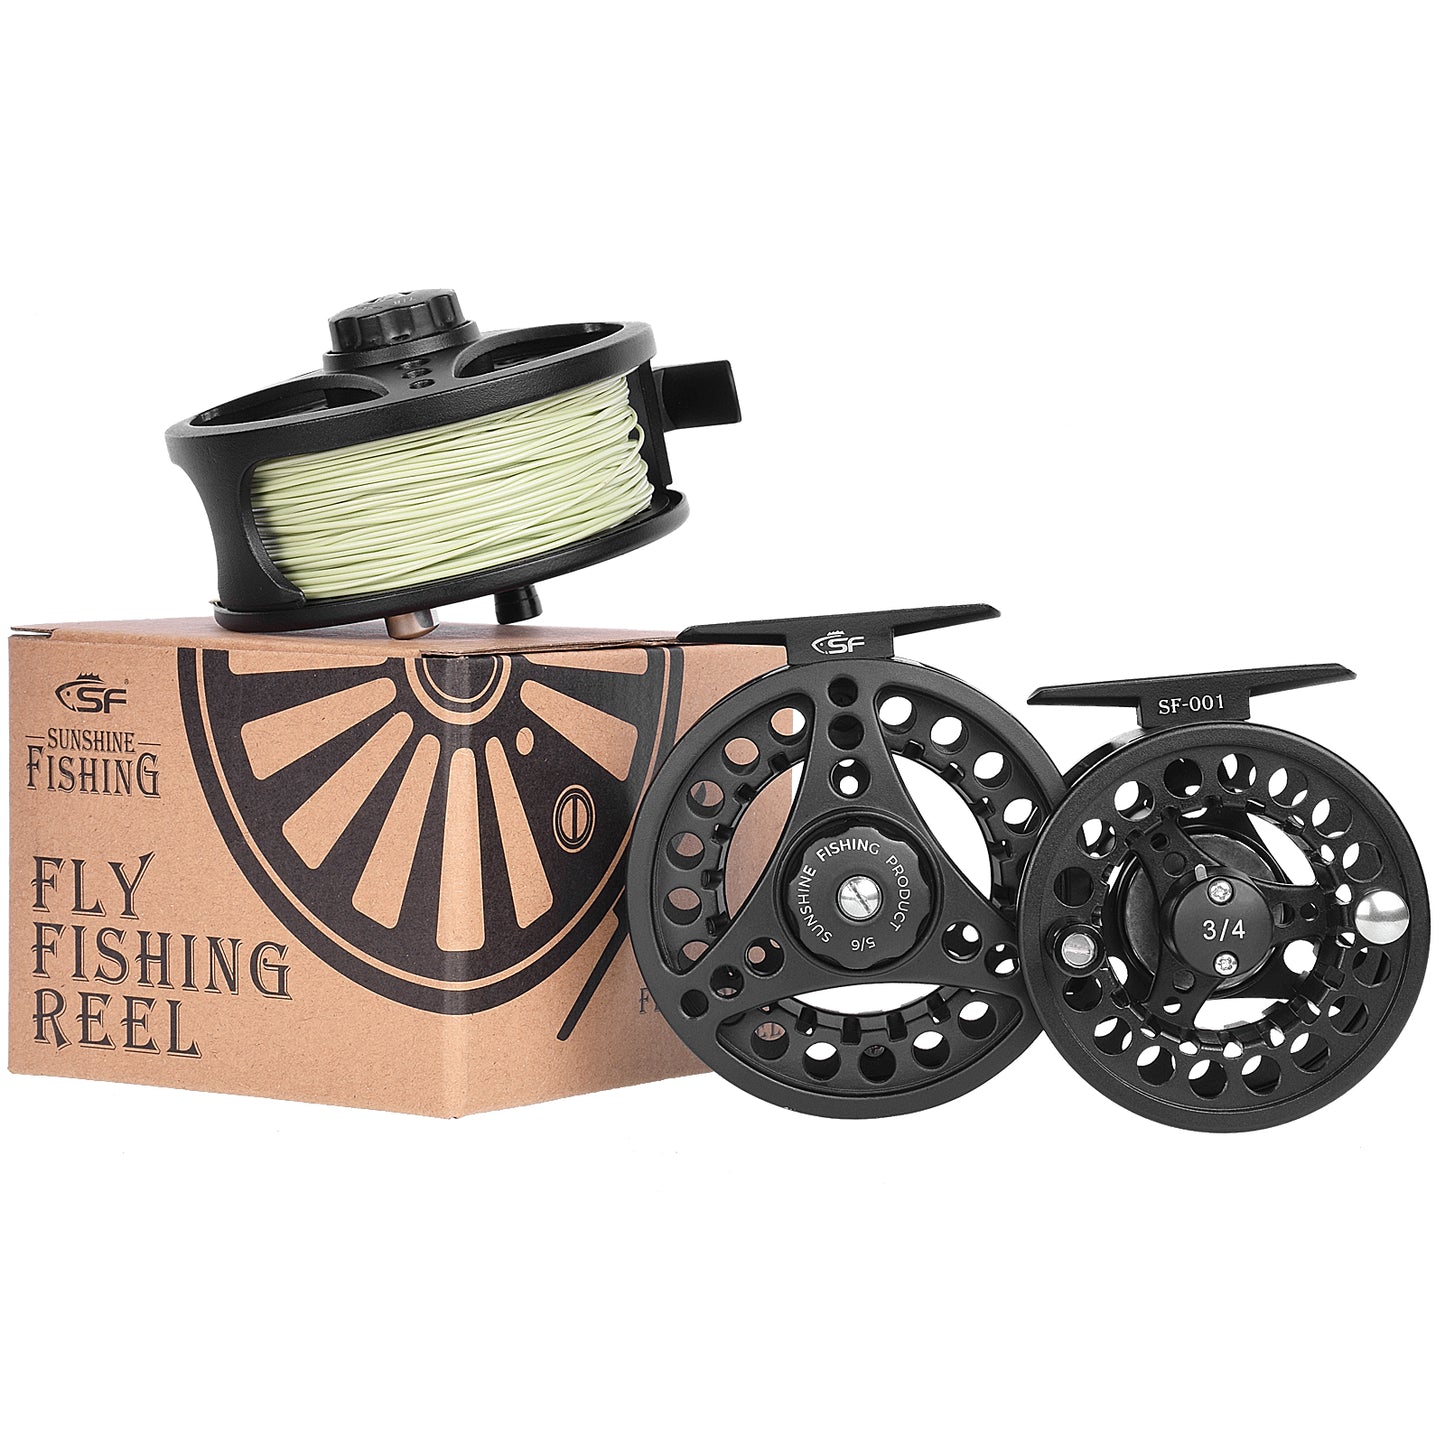  SF Large Arbor Fly Fishing Reel 3/4wt Aluminum Alloy Body  Die-Cast Matt Black Pre-Loaded Fly Reel with Line Combo Fluorescent Yellow  Fly Line : Sports & Outdoors